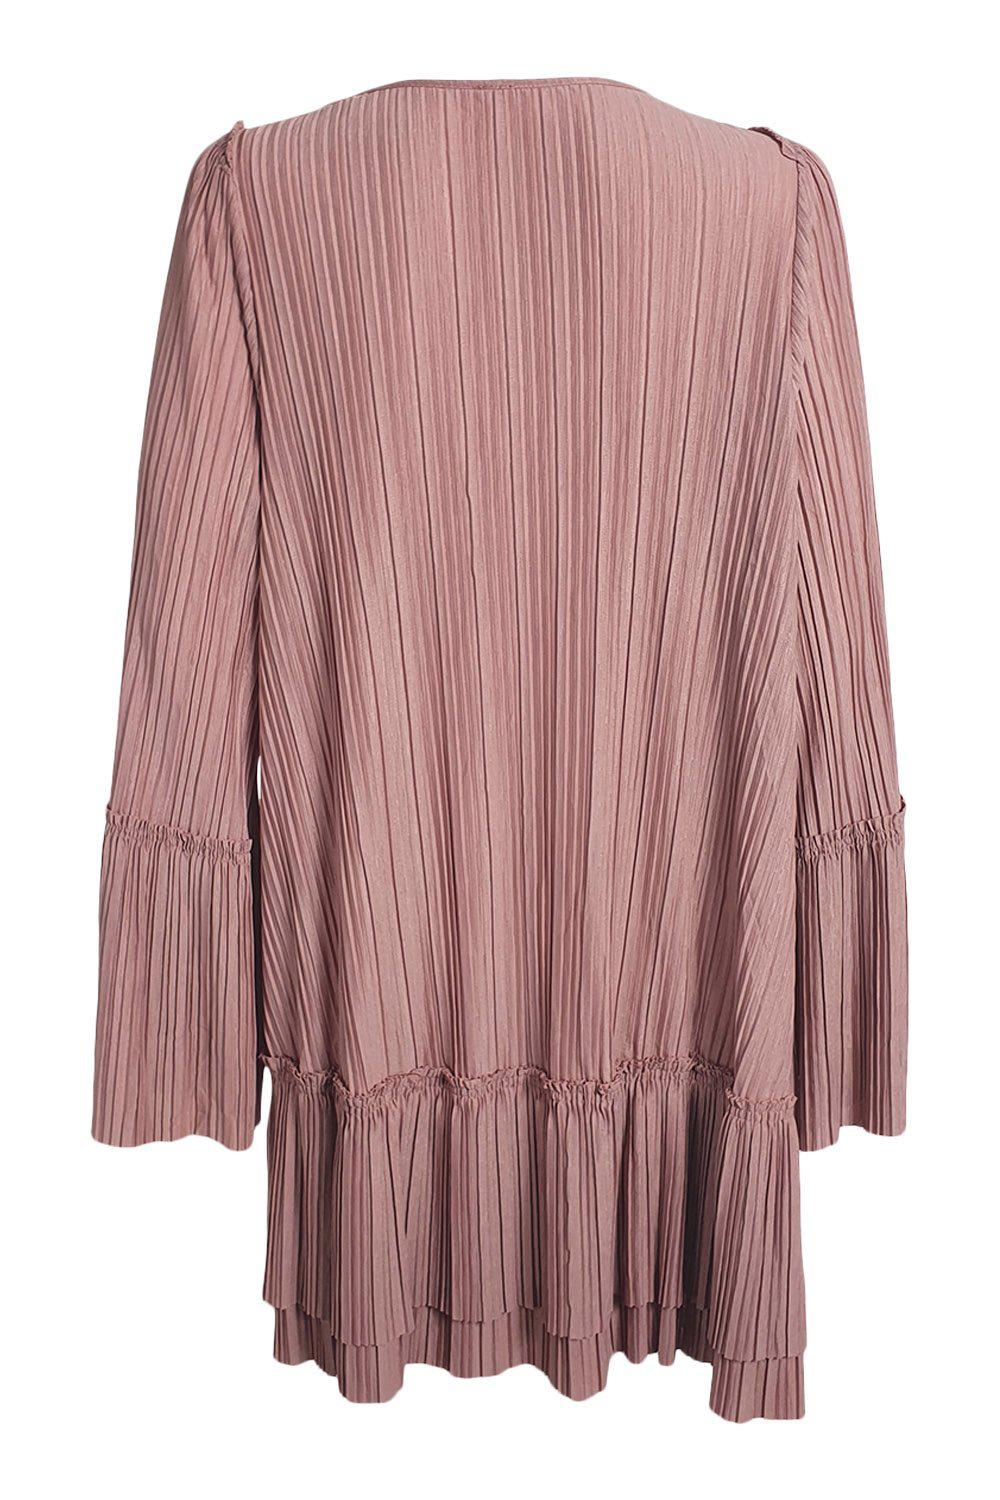 FREE PEOPLE Dusty Rose Pink V Front Pleated Mini Dress (M)-Free People-The Freperie